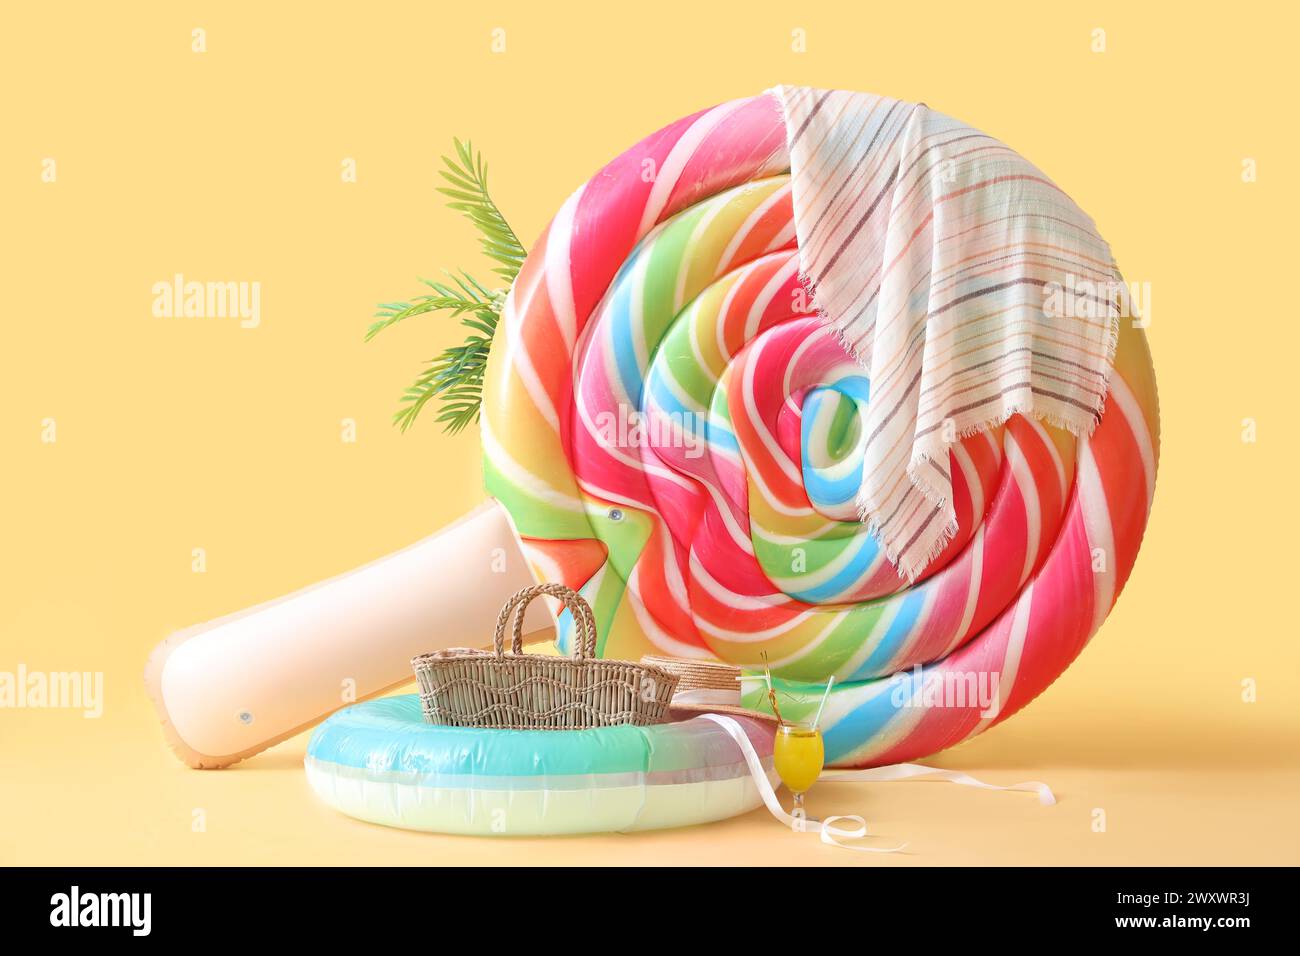 Swimming mattress in shape of candy with inflatable rings and straw bag on yellow background Stock Photo